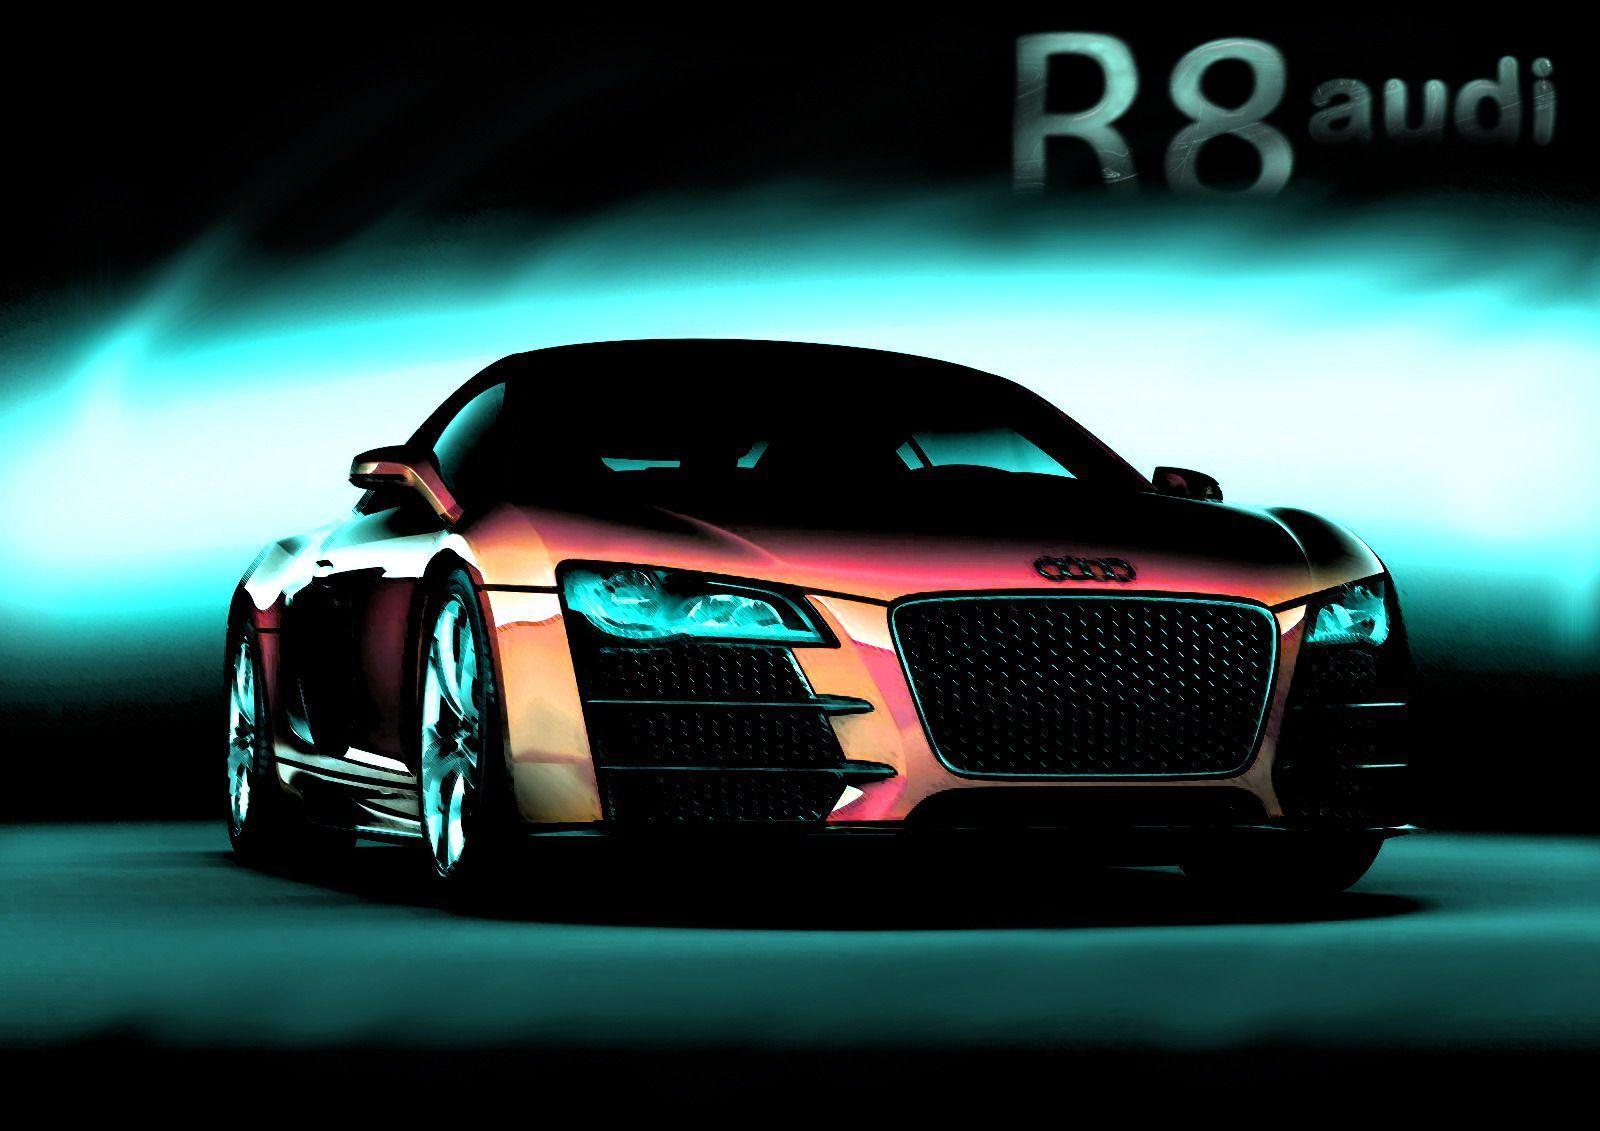 Audi R8 Cars Wallpapers For Widescreen & Desktop Backgrounds